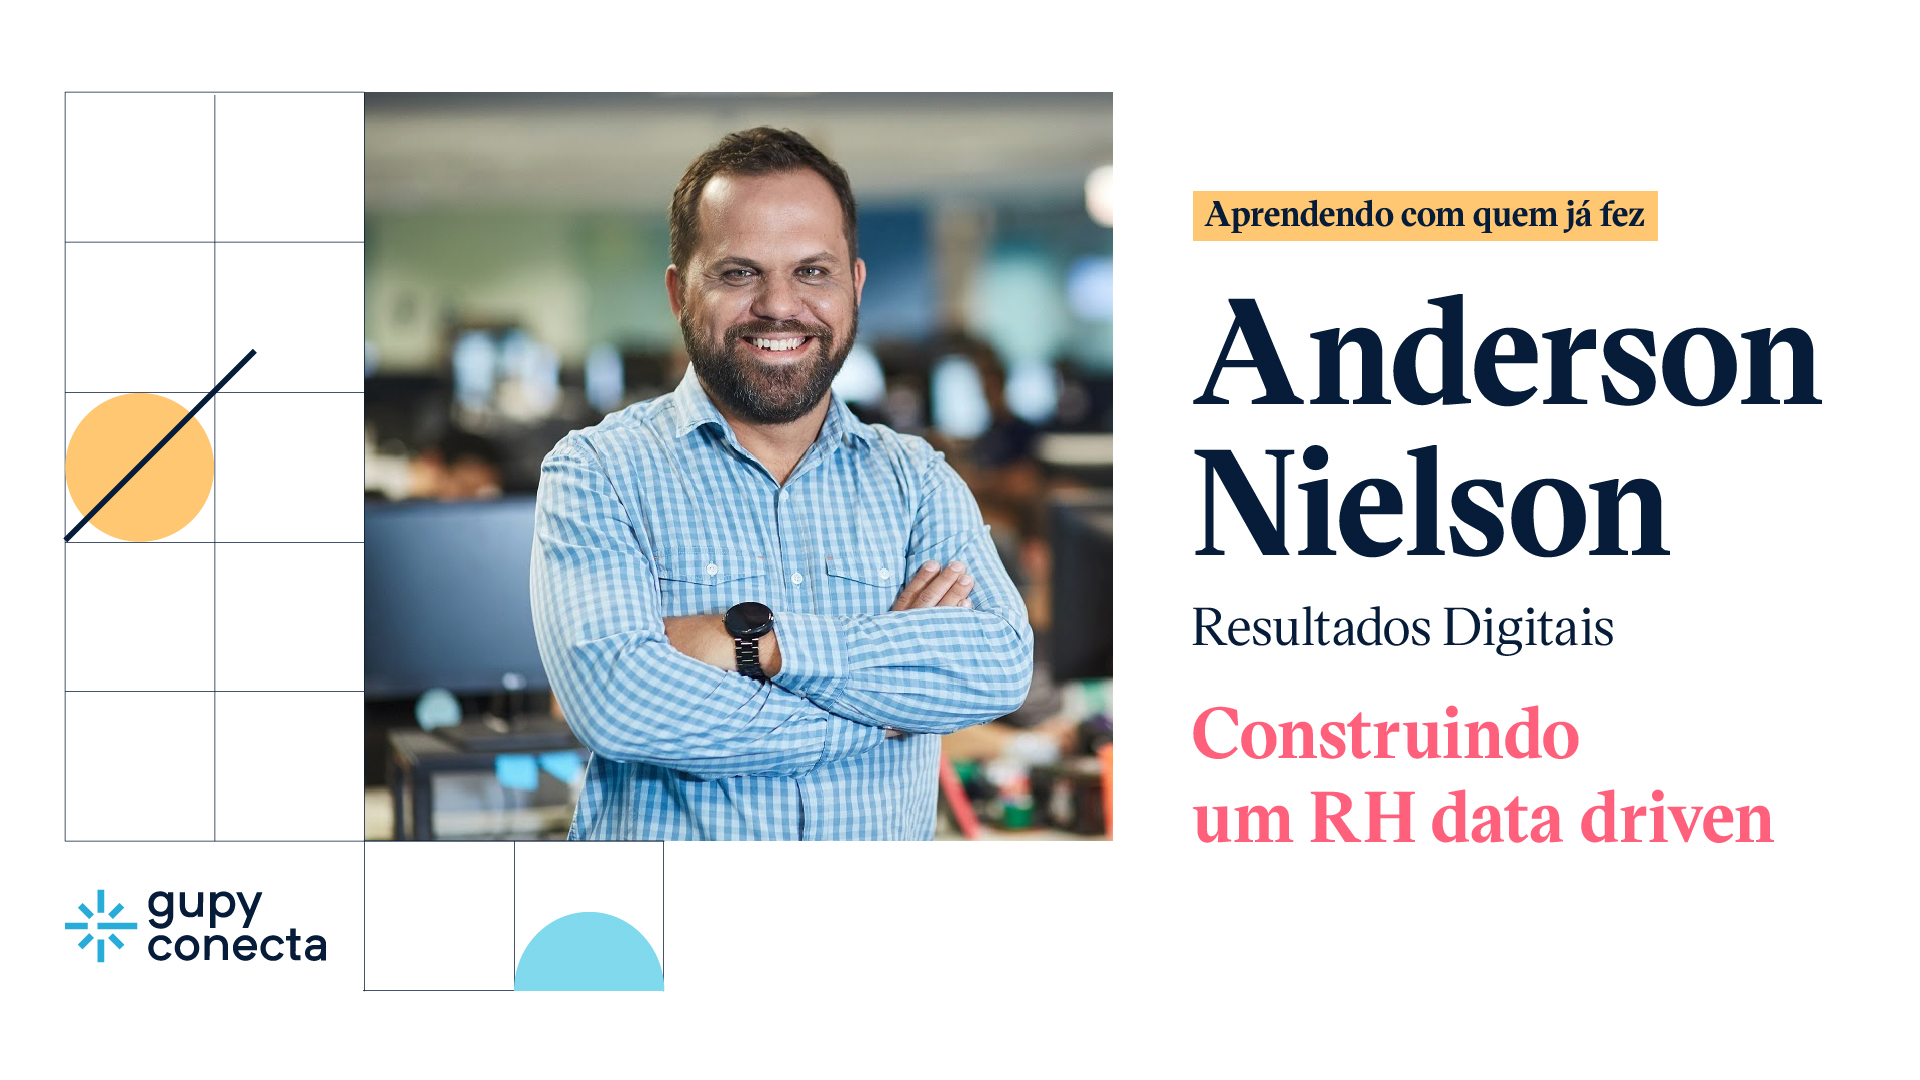 Anderson Nielson